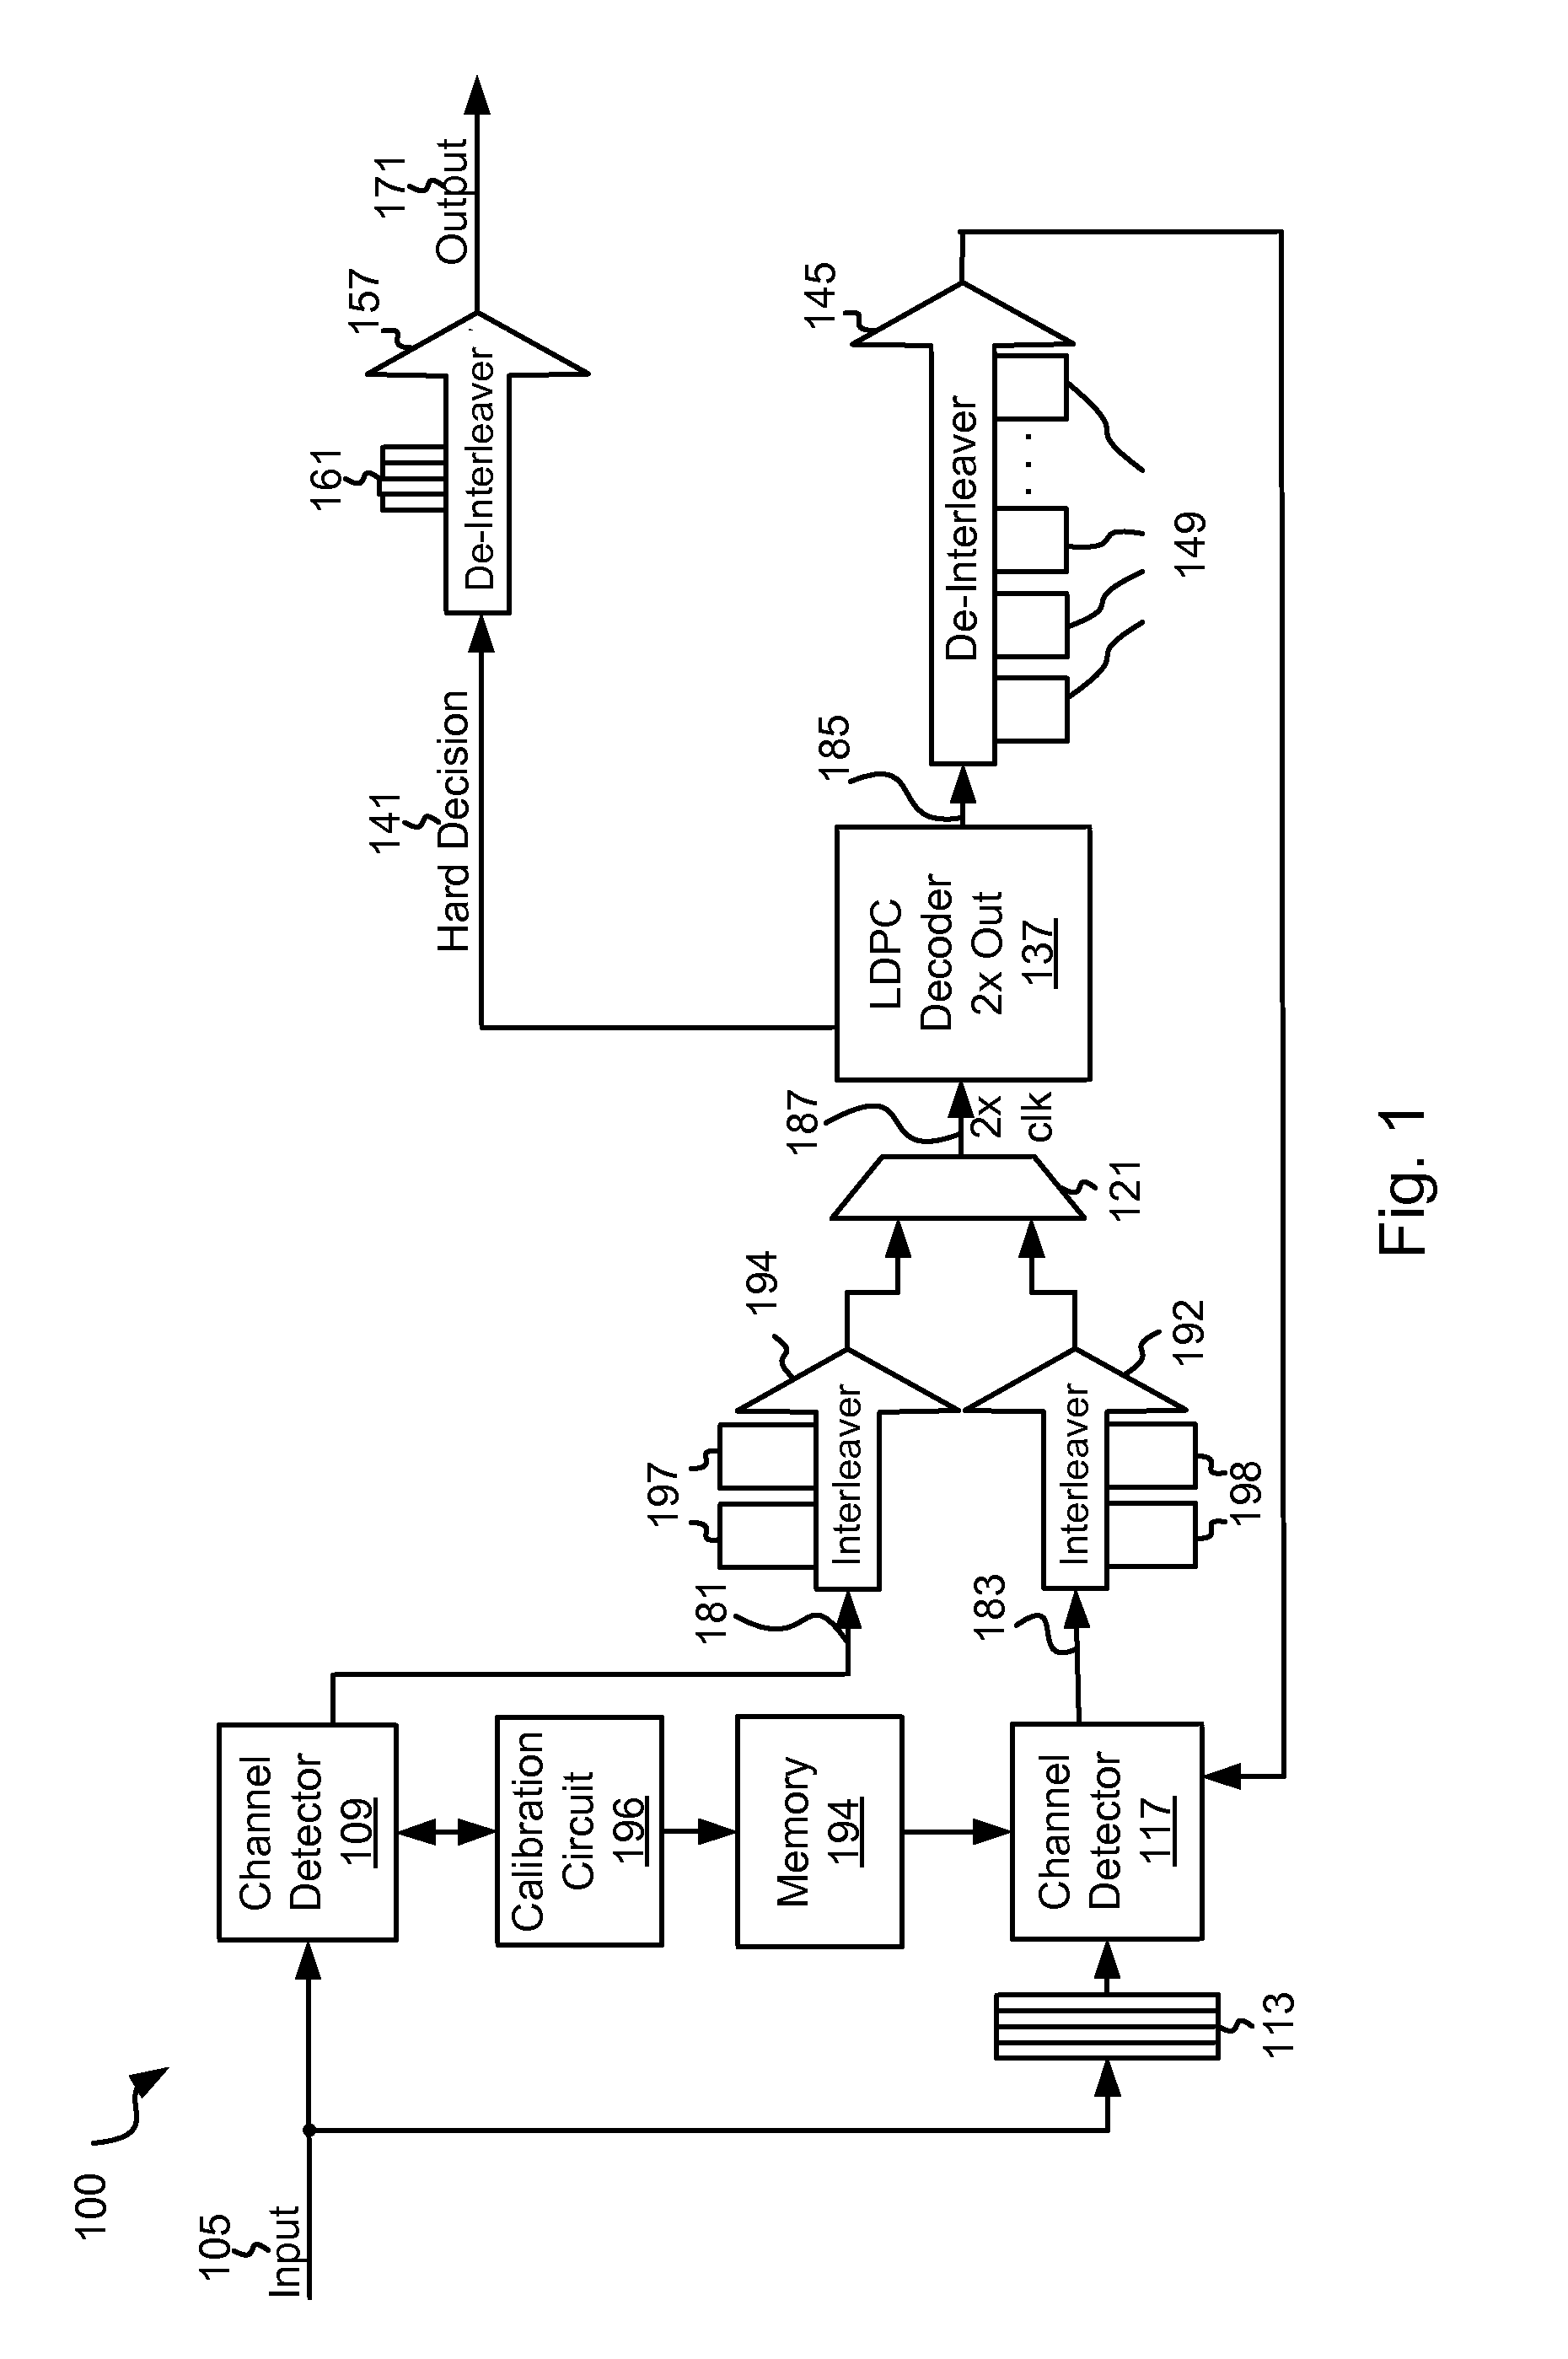 Systems and Methods for Updating Detector Parameters in a Data Processing Circuit